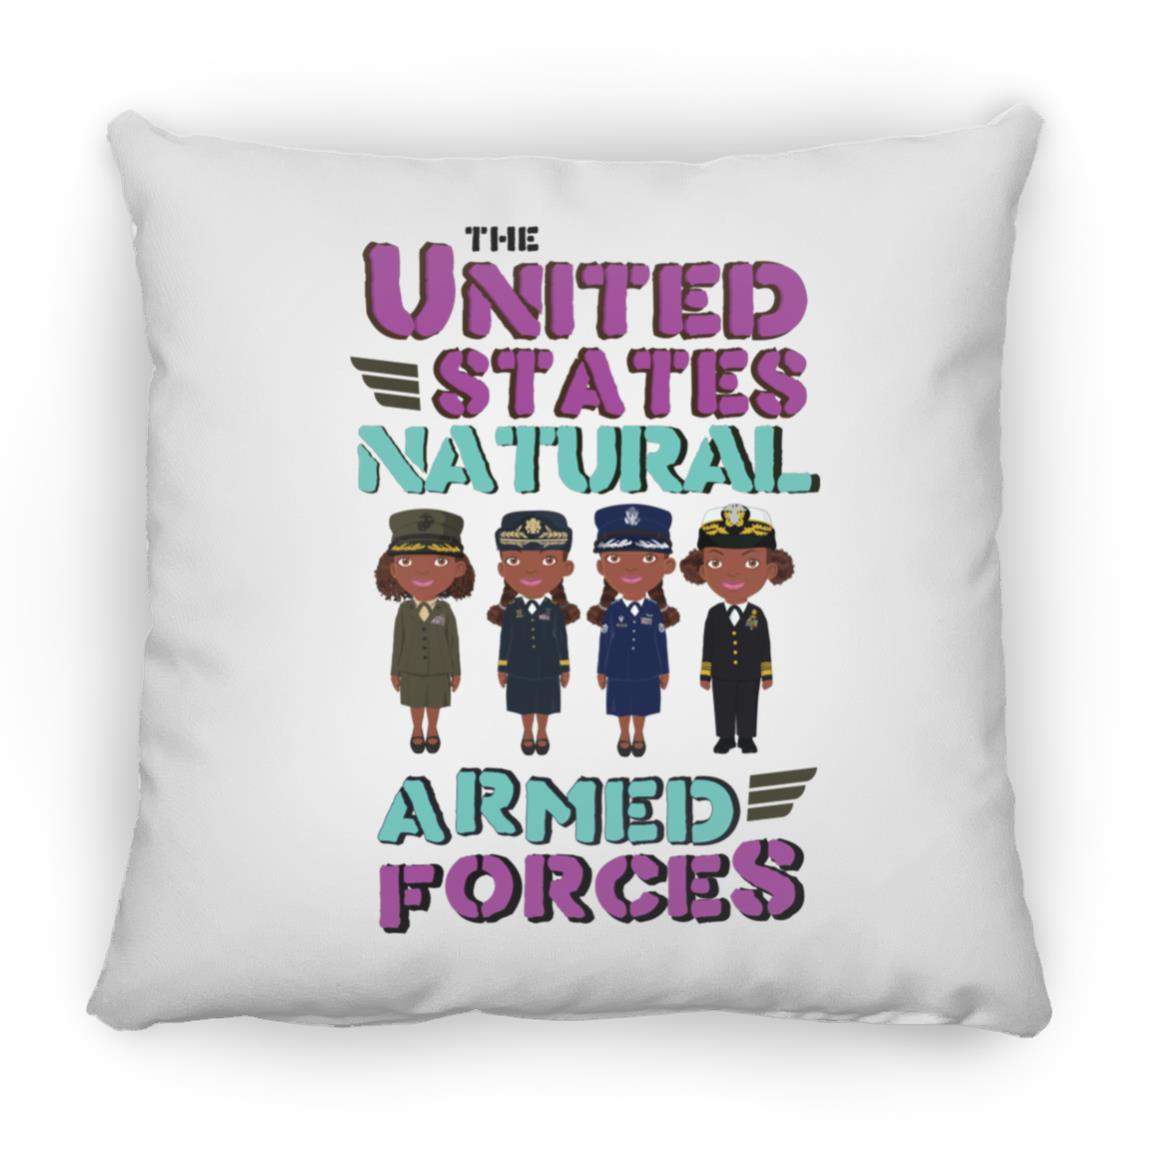 Armed Forces Pillow 16x16-CustomCat-Accessories,Armed Forces with Awesome Hair,Housewares,Pillows,Shop